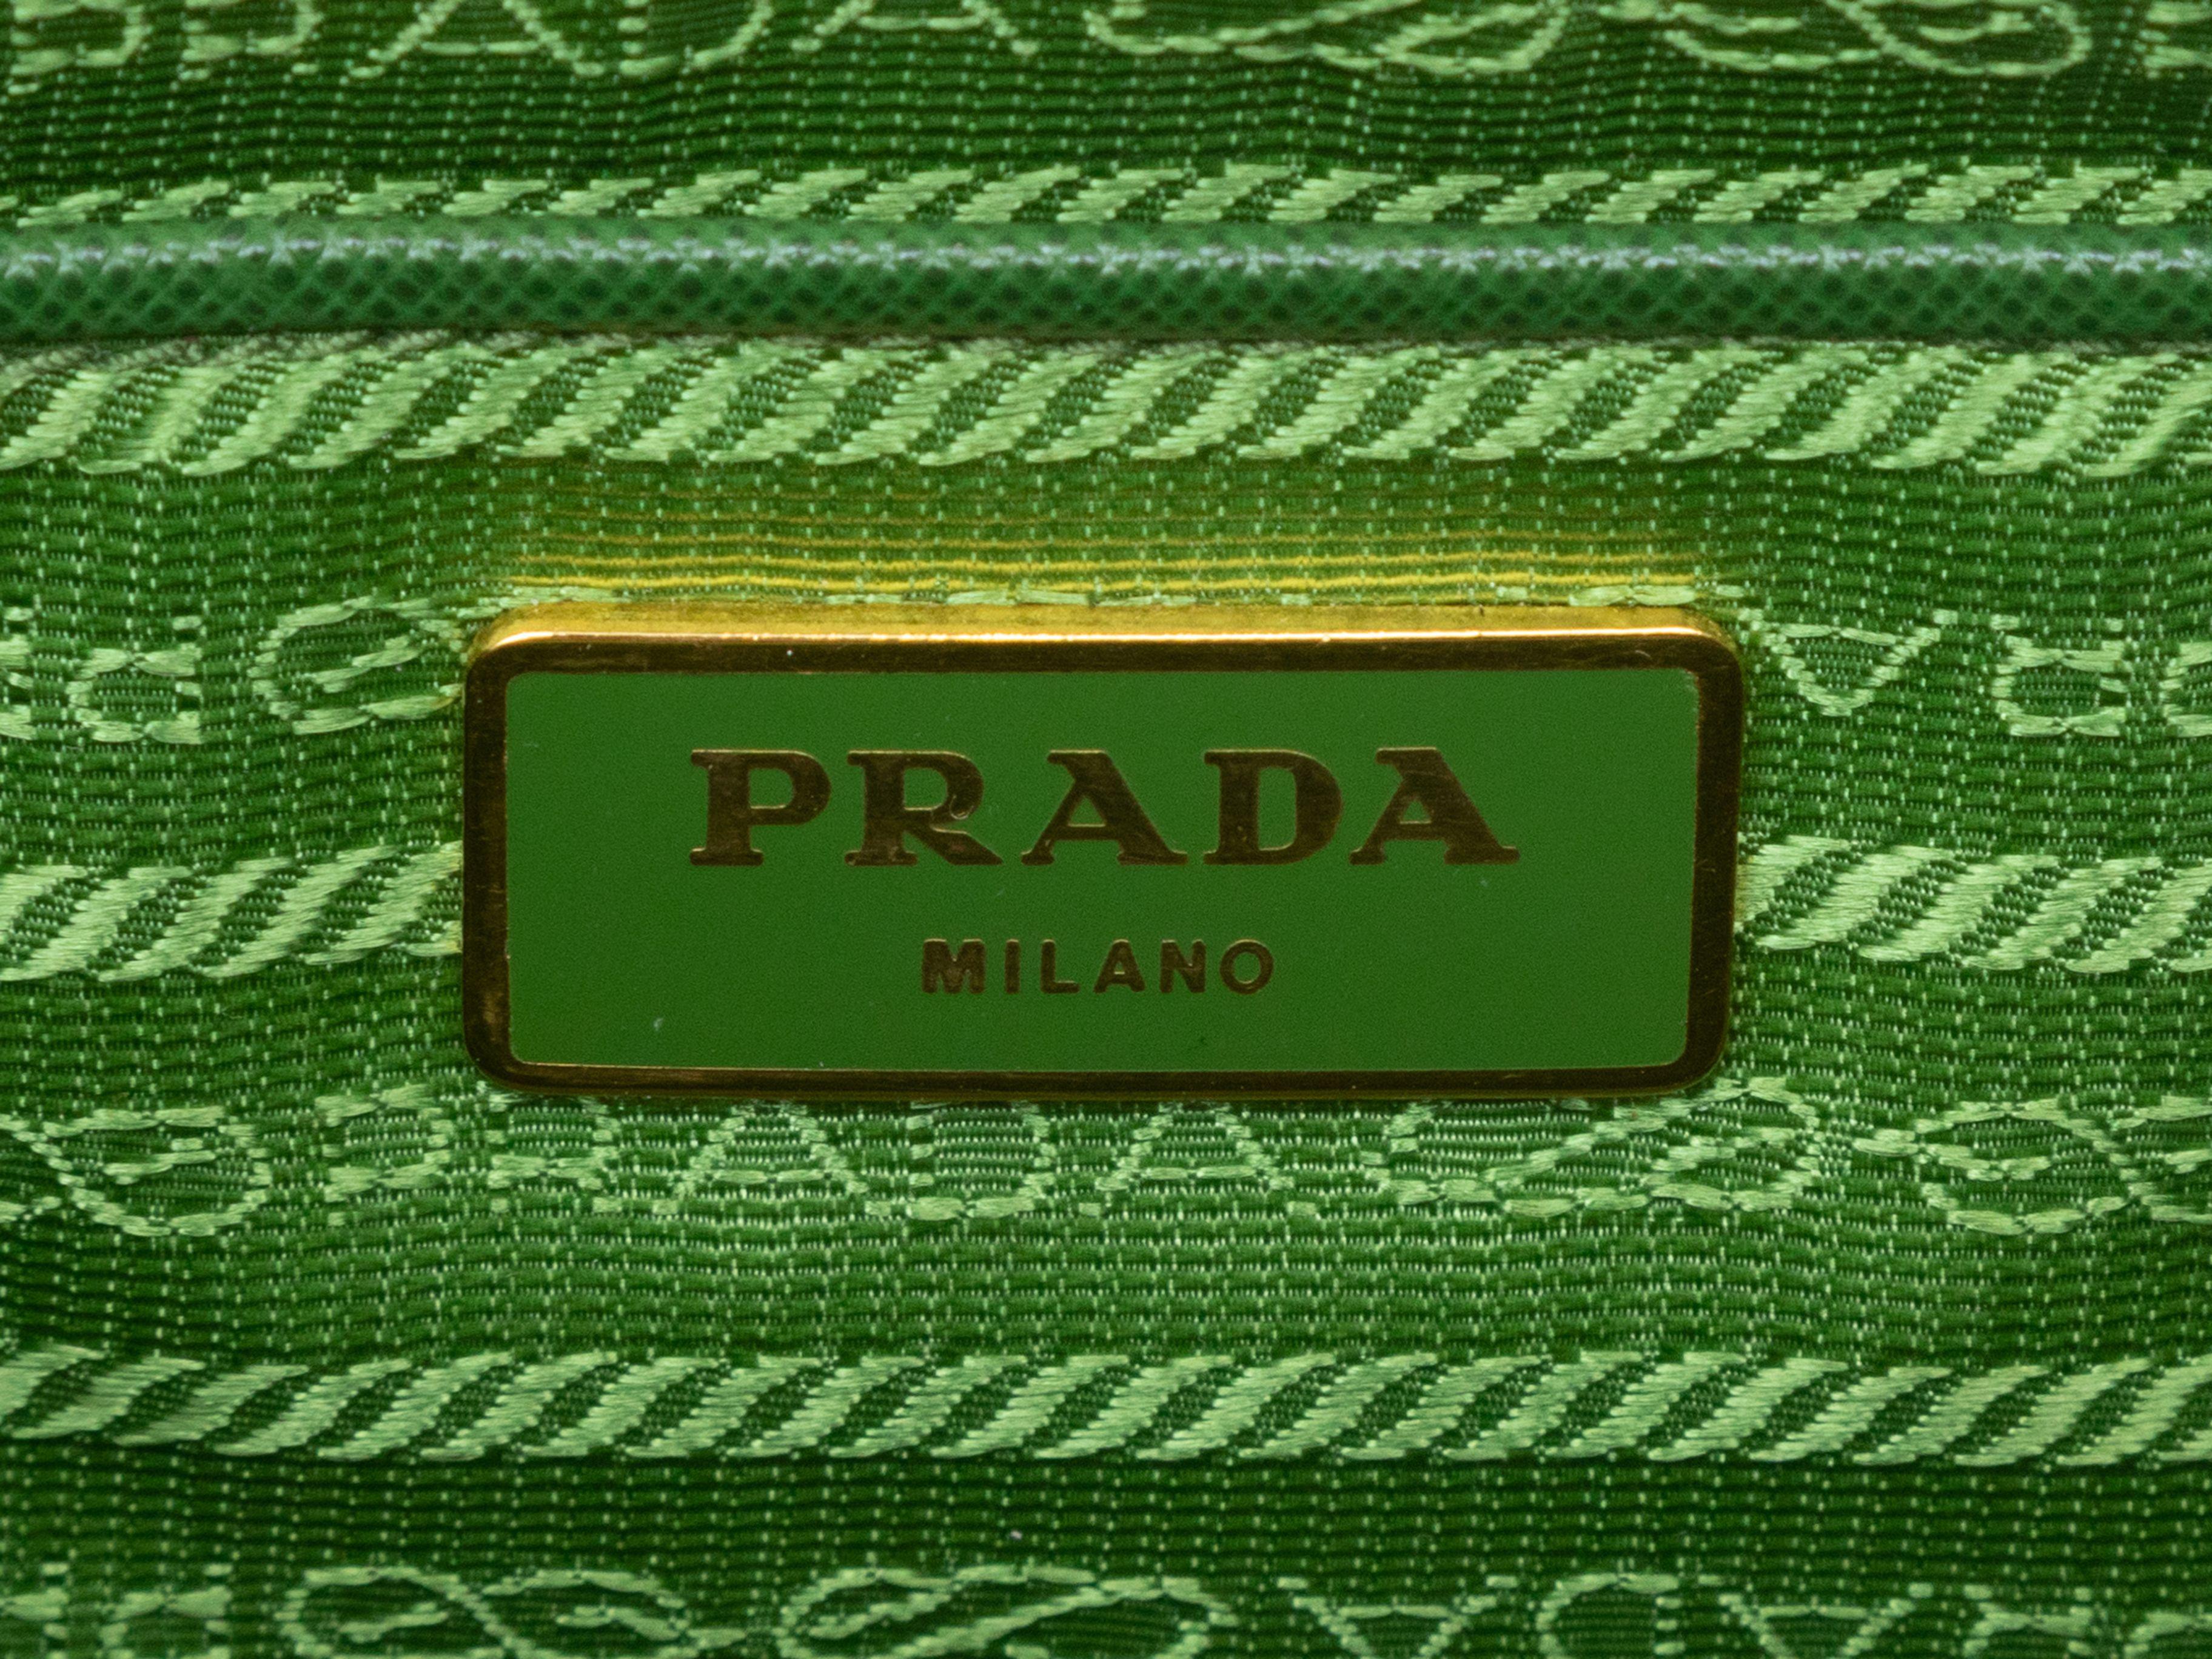 Product Details: Pink & Green Prada Raffia Woven Clutch. This clutch features a raffai body, gold-tone hardware, and a top zip closure. 14